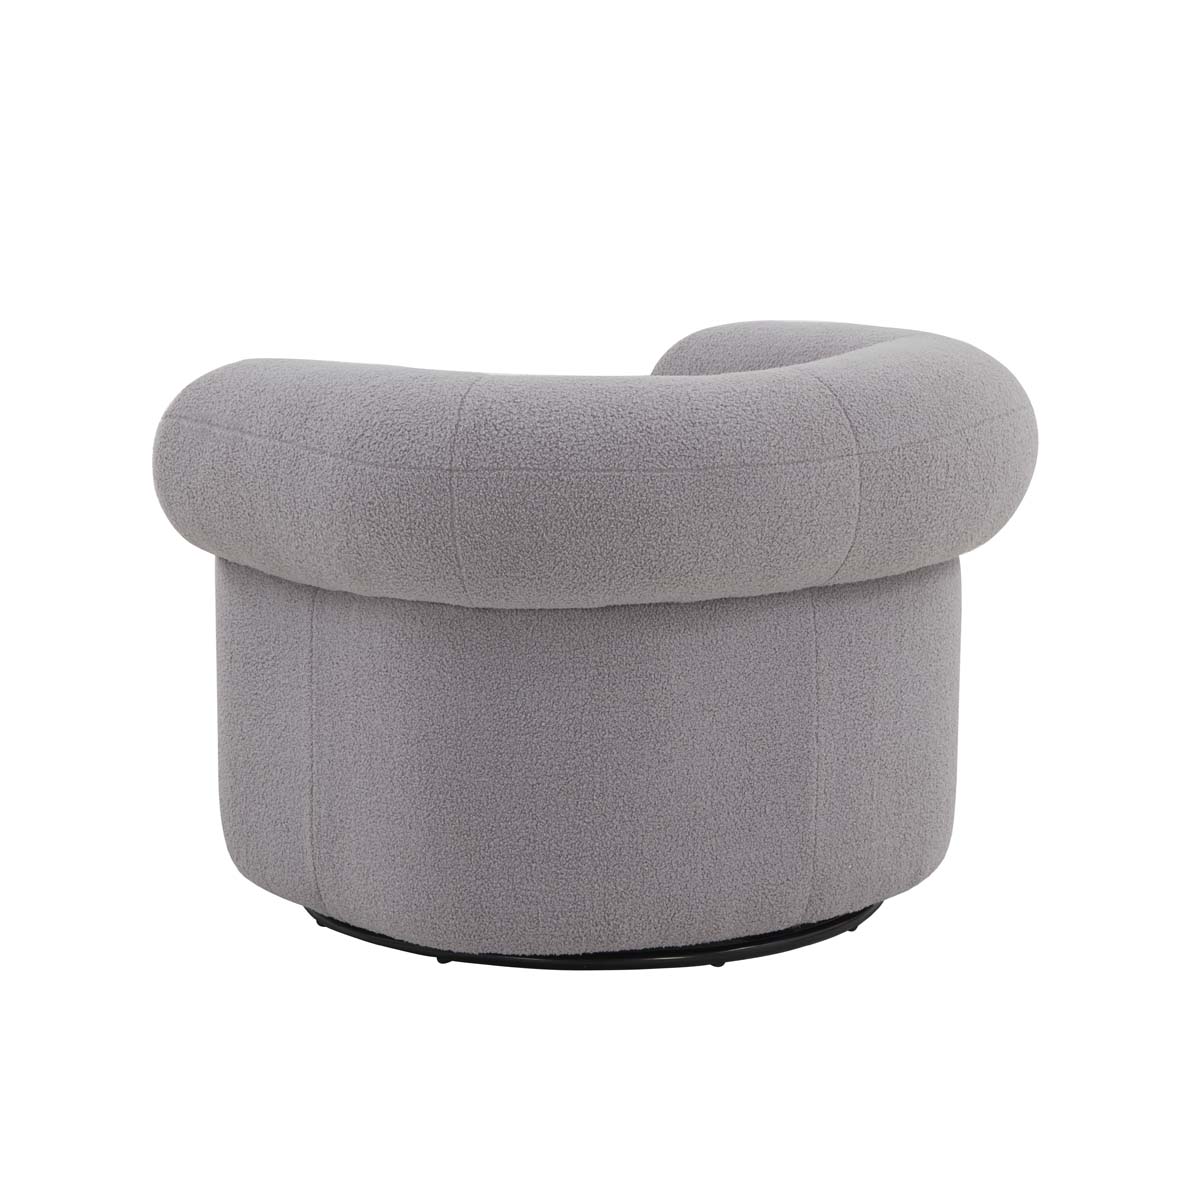 Safavieh Couture Sadie Swivel Accent Chair - Light Grey